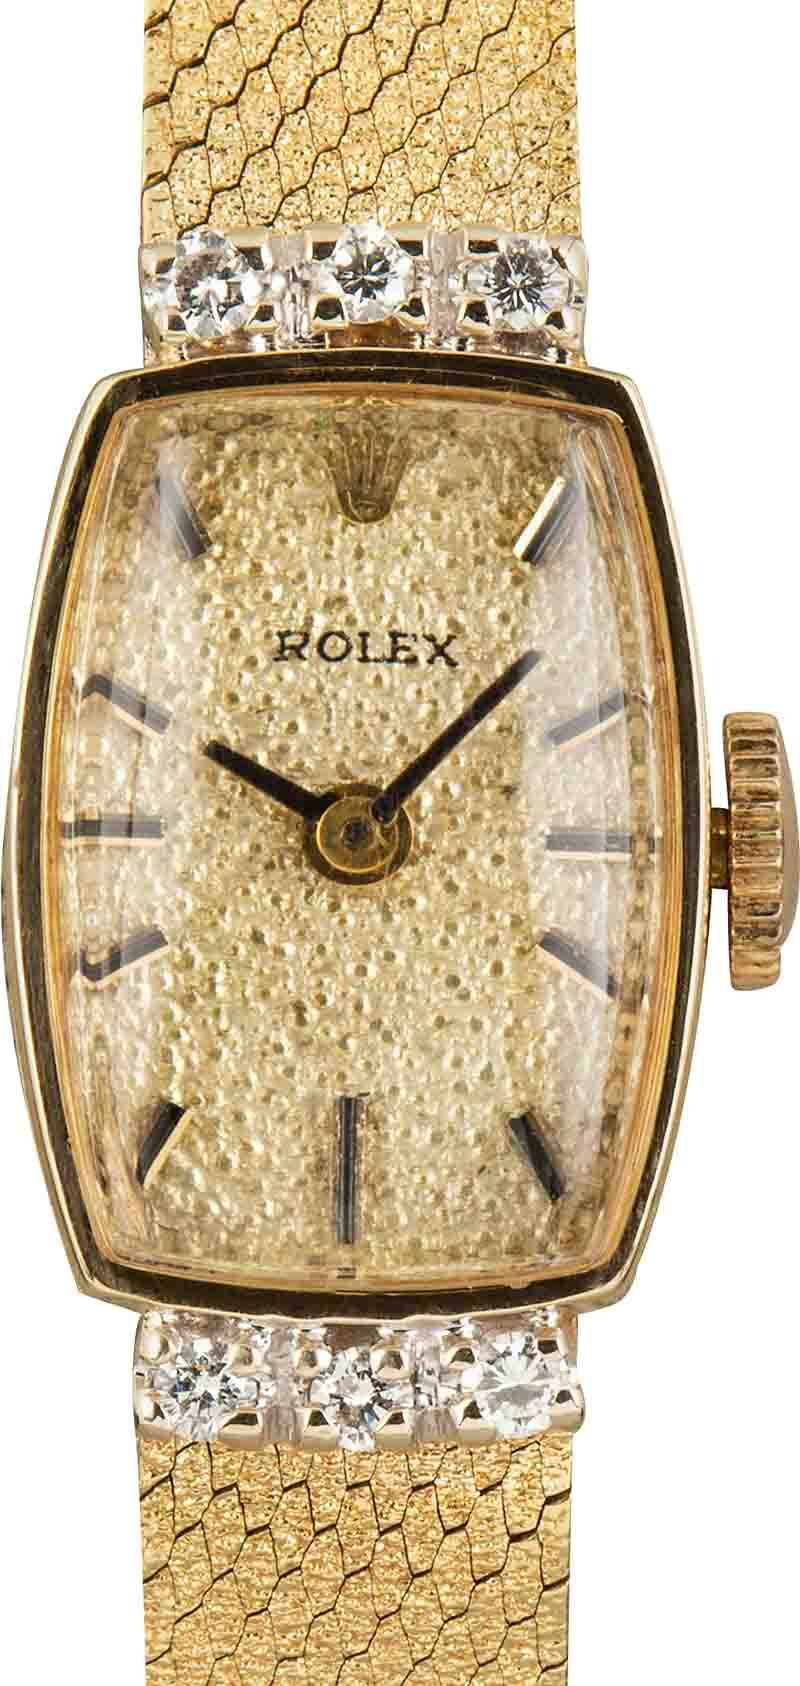 Buy Used Rolex Cocktail | Bob's Watches - Sku: 162726